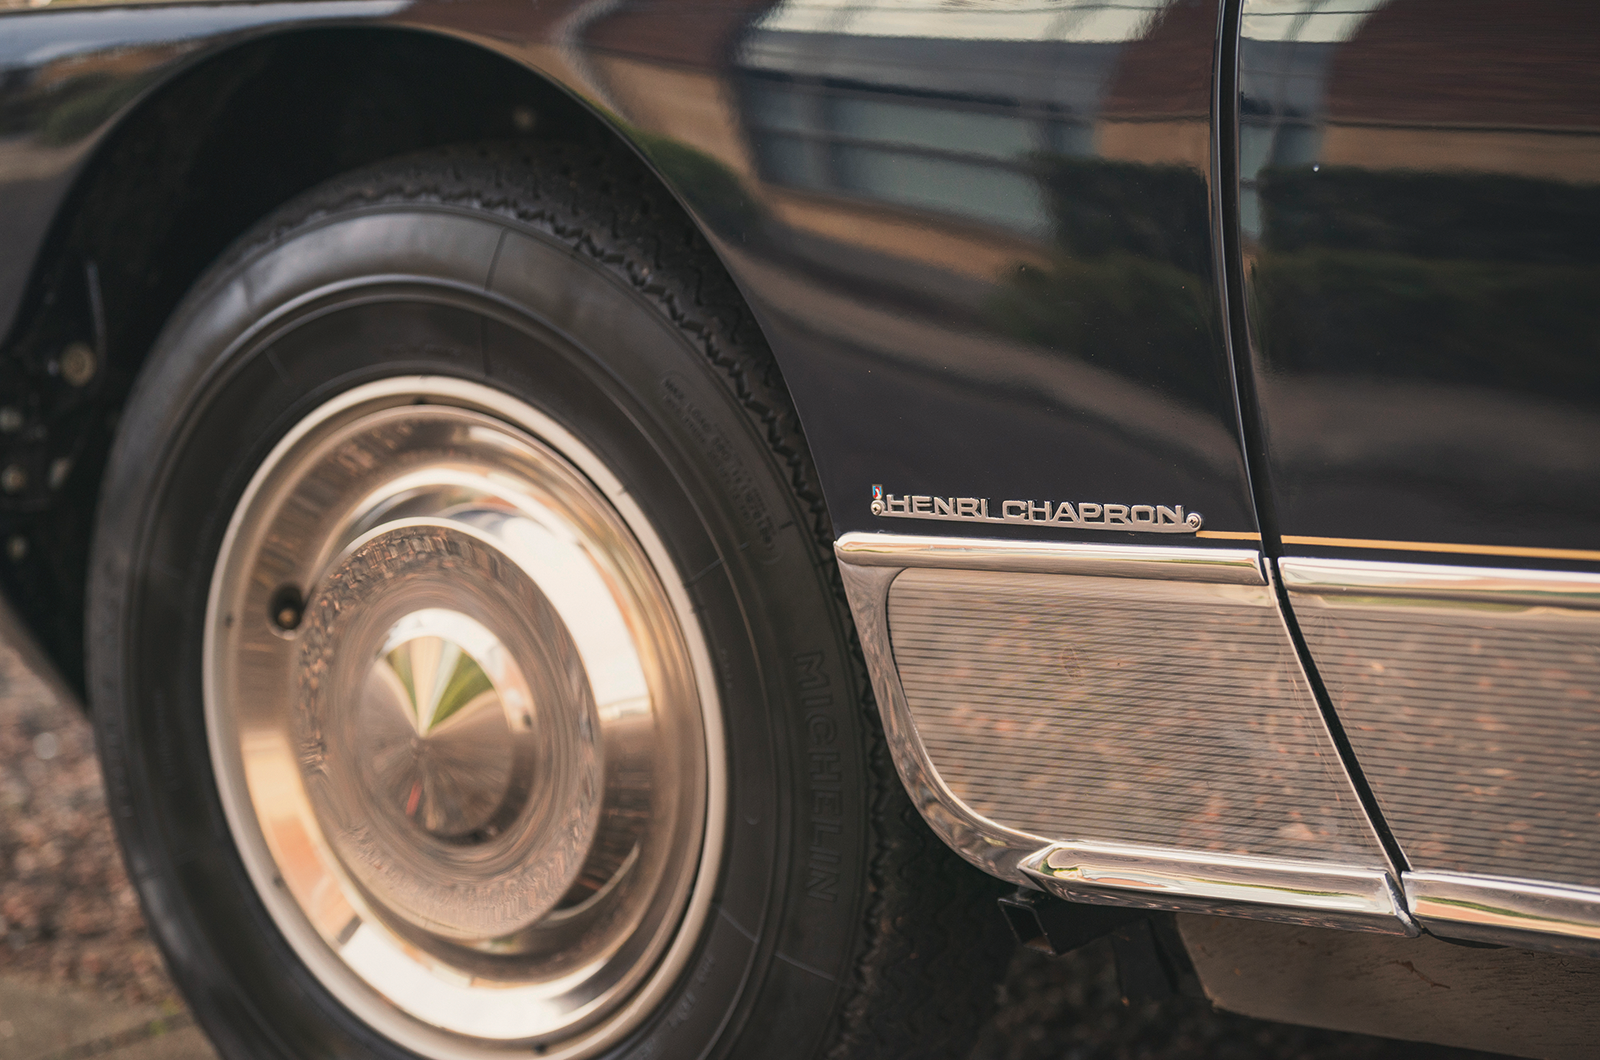 Classic & Sports Car – Citroën DS Majesty: the Midas touch